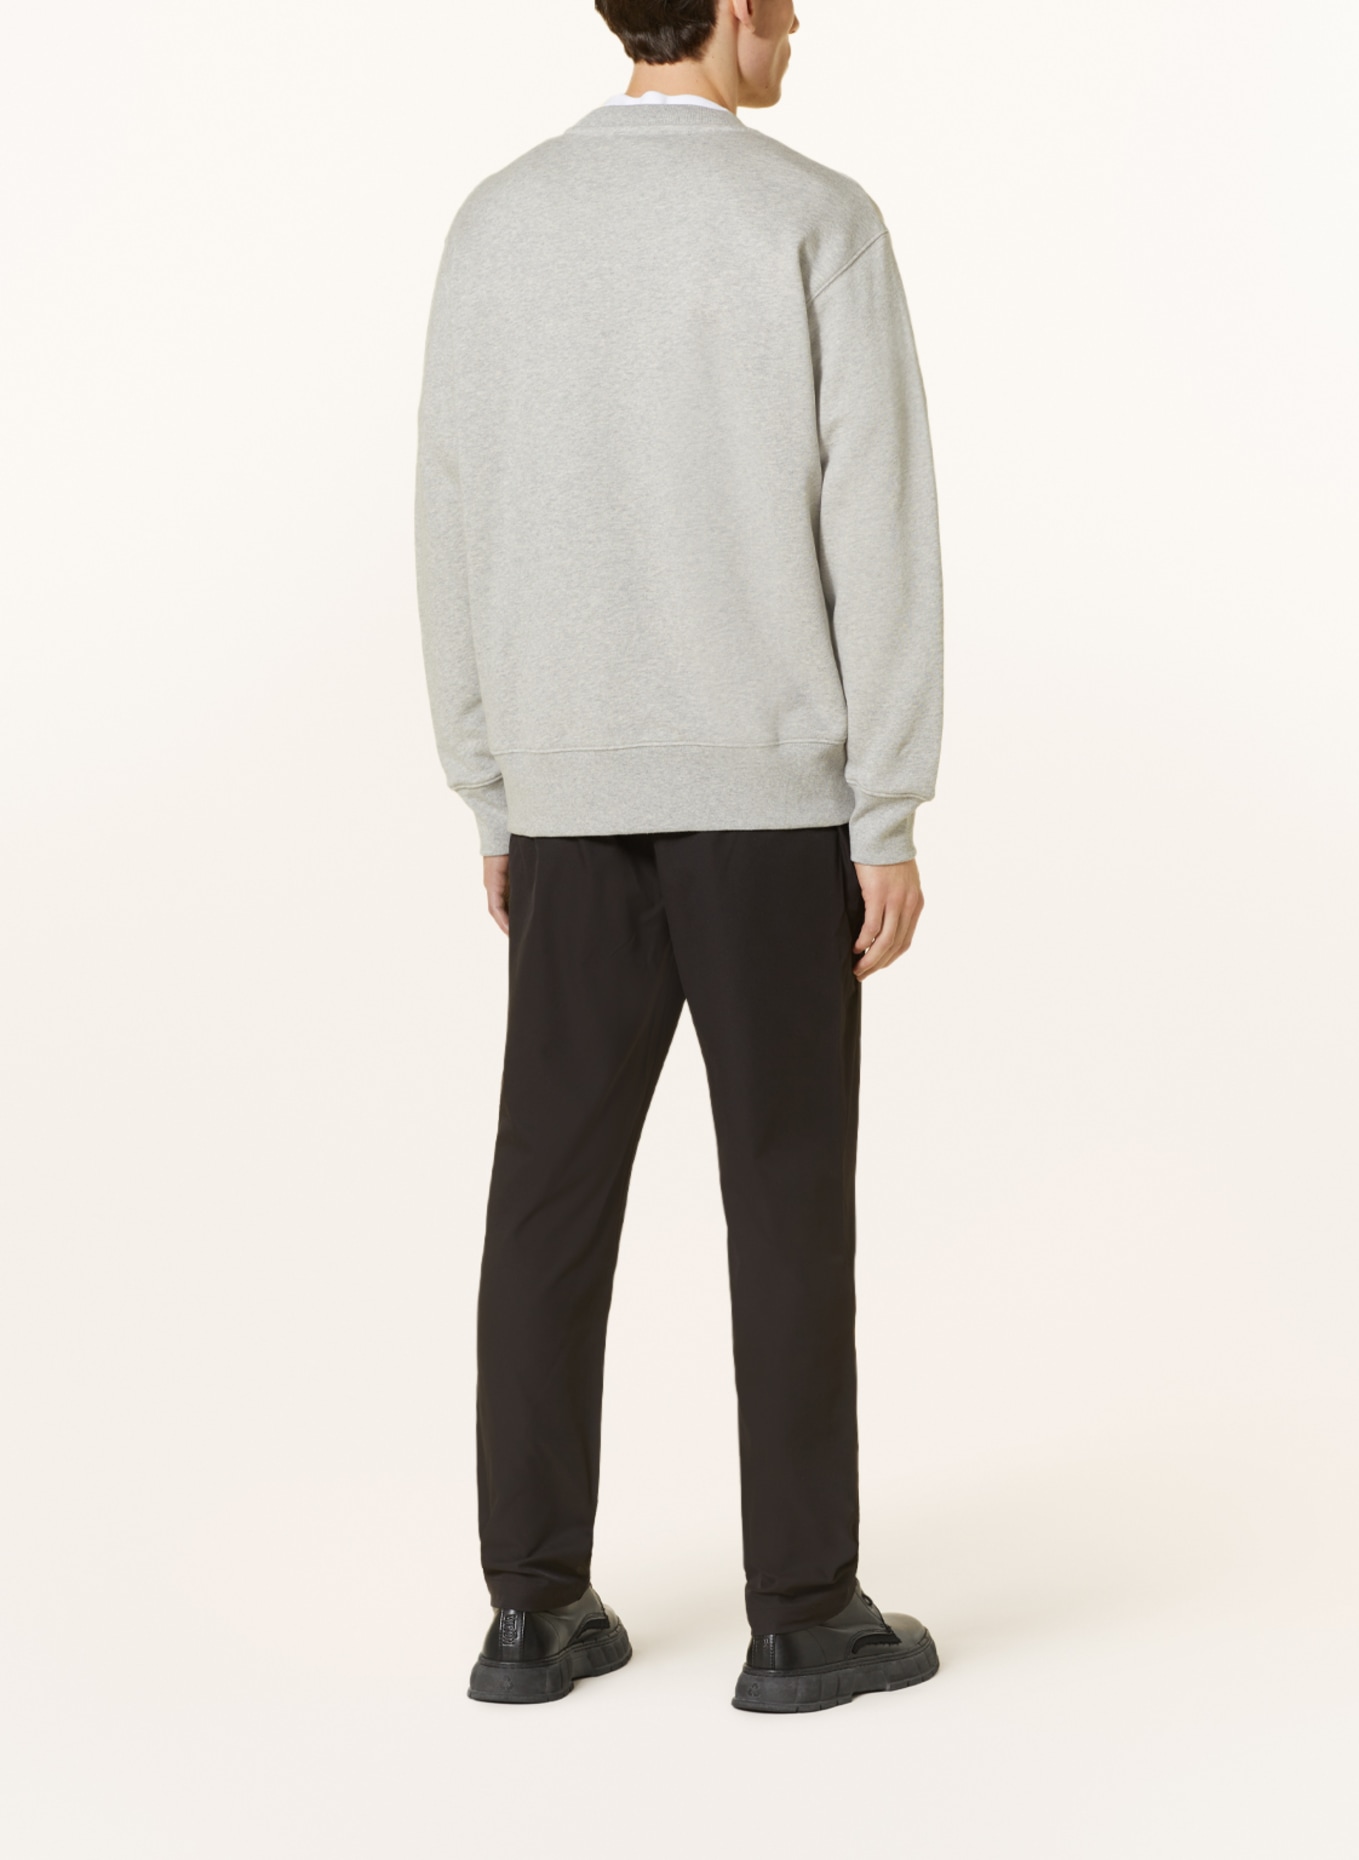 NORSE PROJECTS Sweatshirt ARNE, Color: LIGHT GRAY (Image 3)